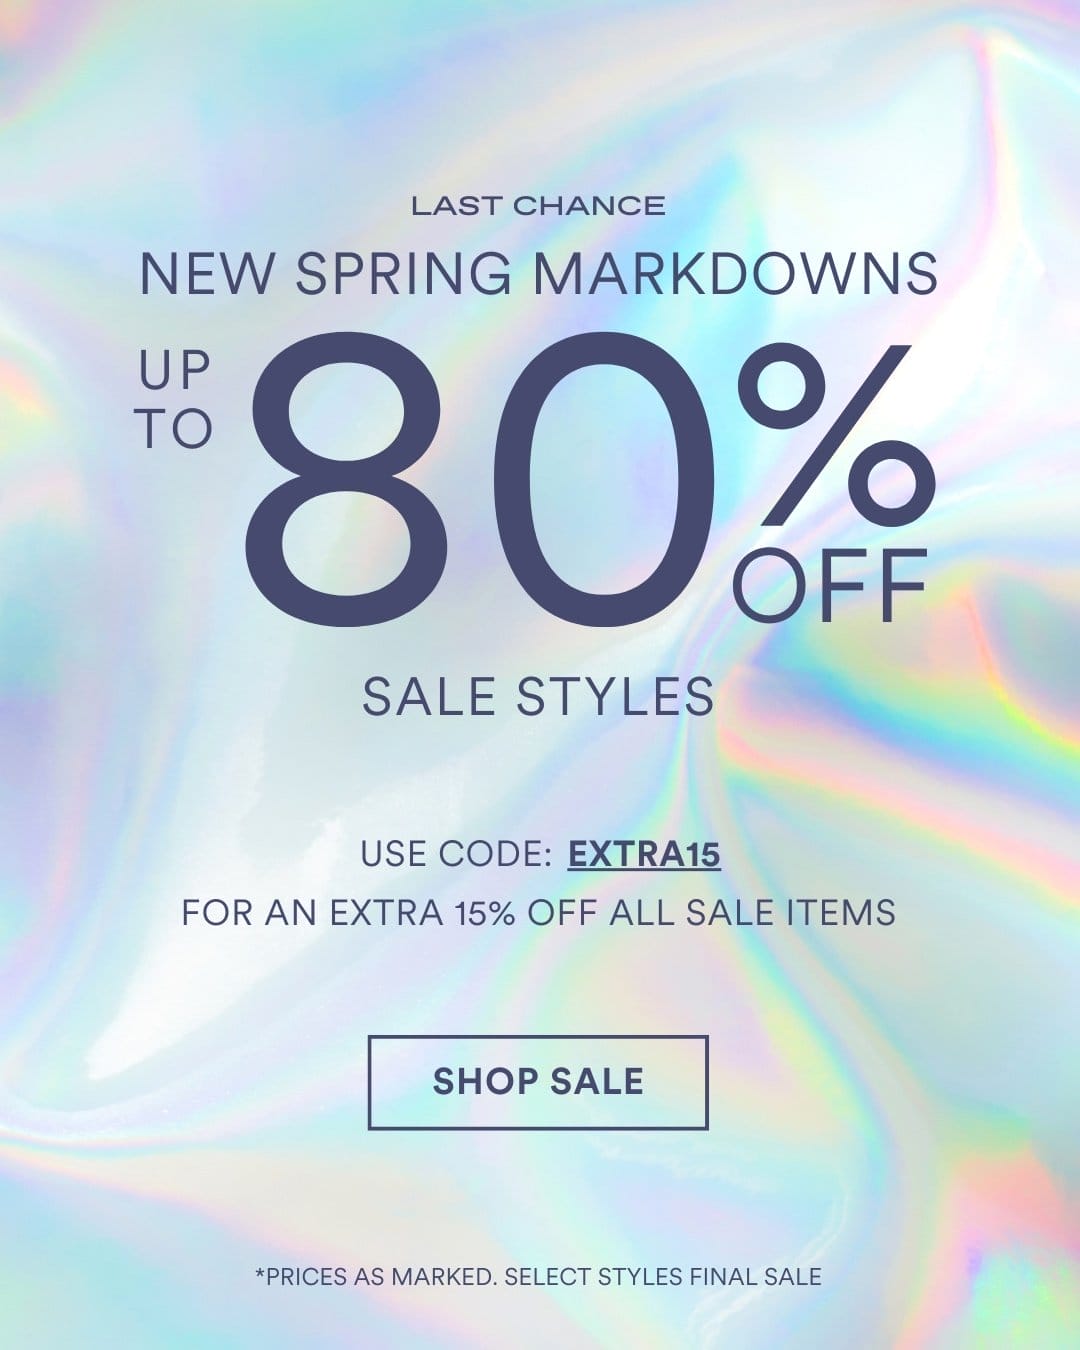 LAST CHANCE UP TO 80 % OFF SALE STYLES NEW SPRING MARKDOWNS *PRICES AS MARKED. SELECT STYLES FINAL SALE LIMITED TIME ONLY. SAVE EXTRA 15% OFF WITH CODE EXTRA15